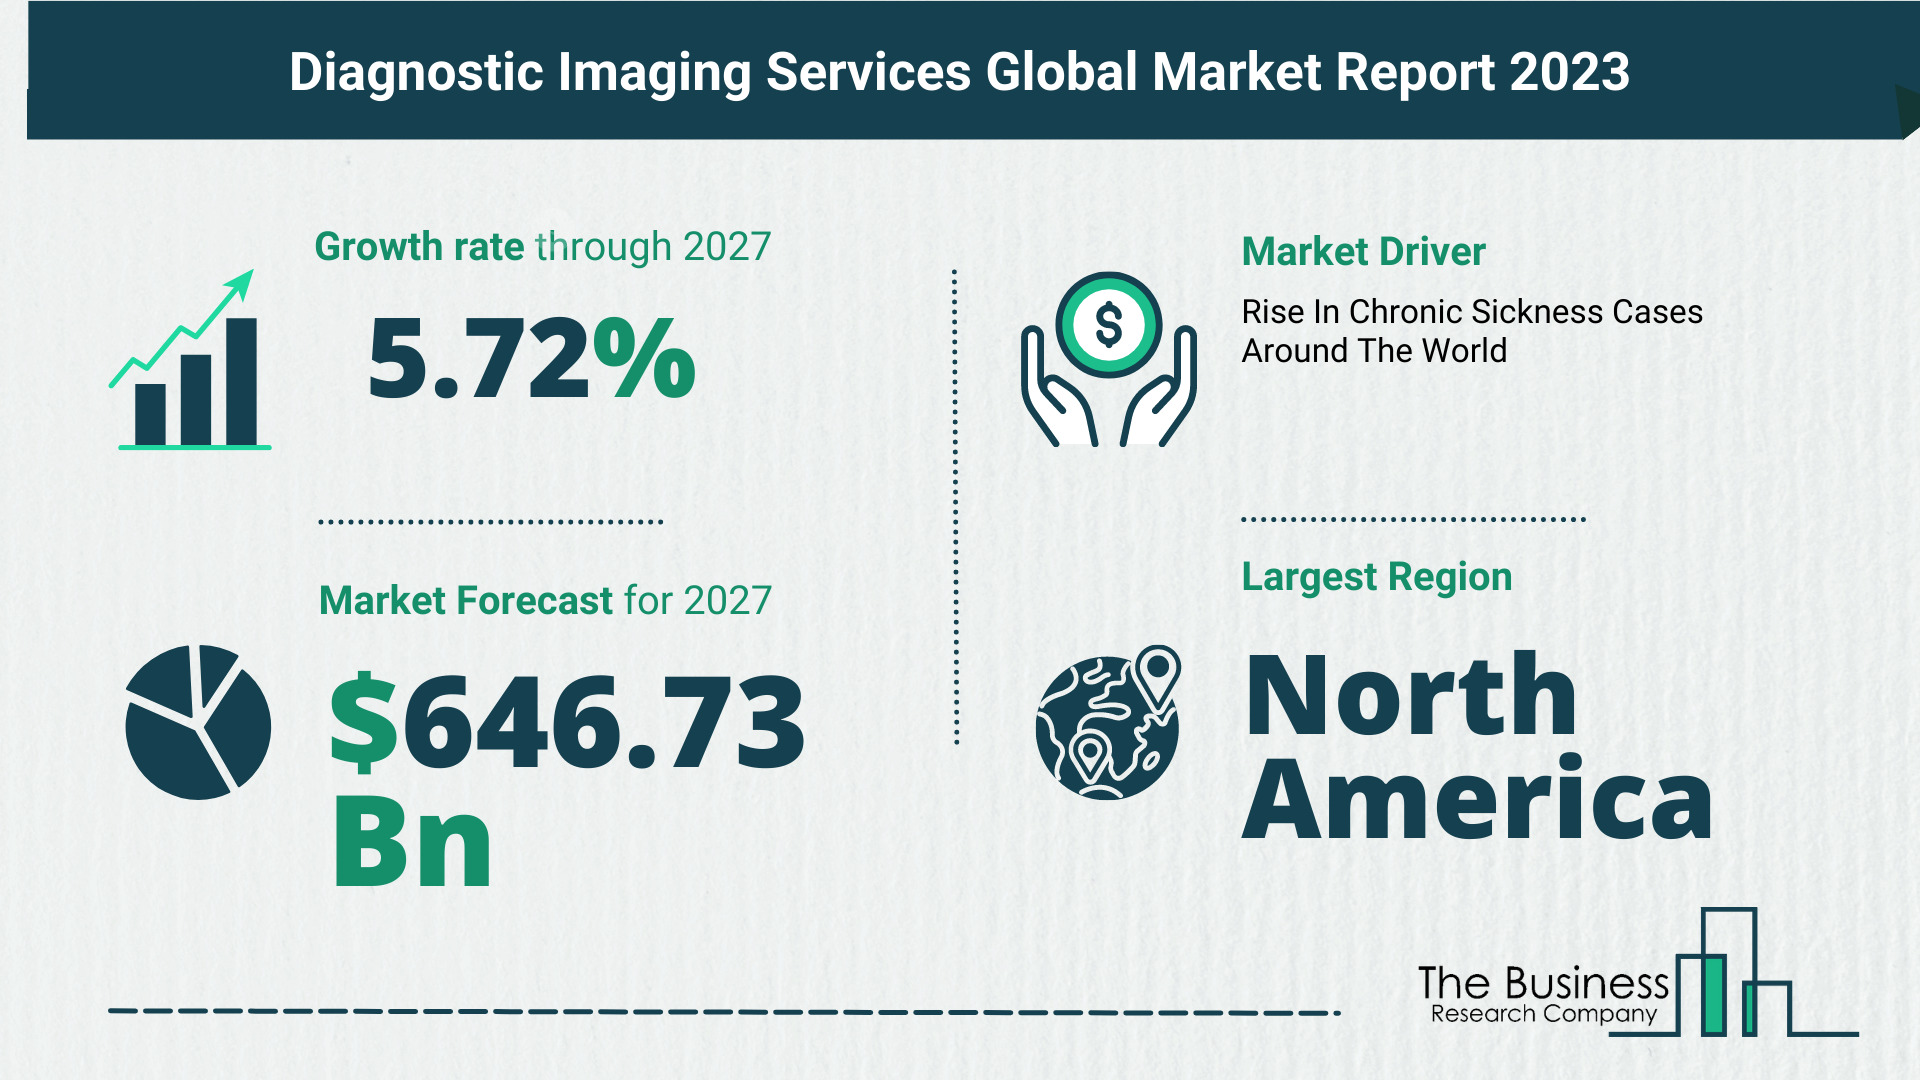 Overview Of The Diagnostic Imaging Services Market 2023: Size, Drivers, And Trends